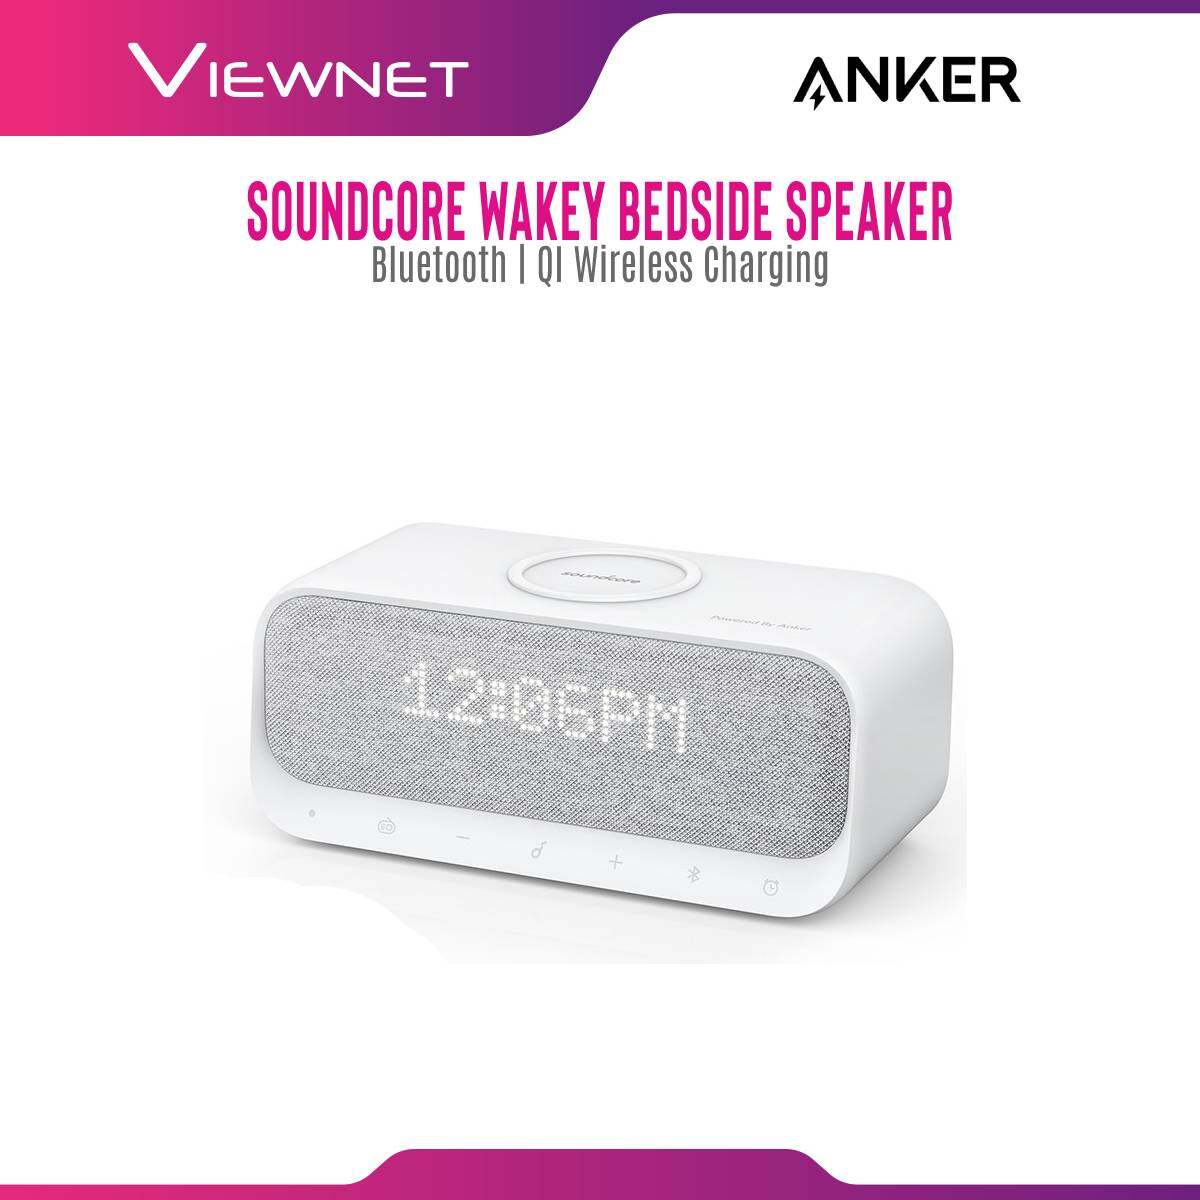 Anker Bluetooth Speaker SoundCore Wakey A3300 with Bluetooth 5.0 Connection, Alarm Clock, Stereo Sound, FM Radio, White Noise, Qi Wireless Charger